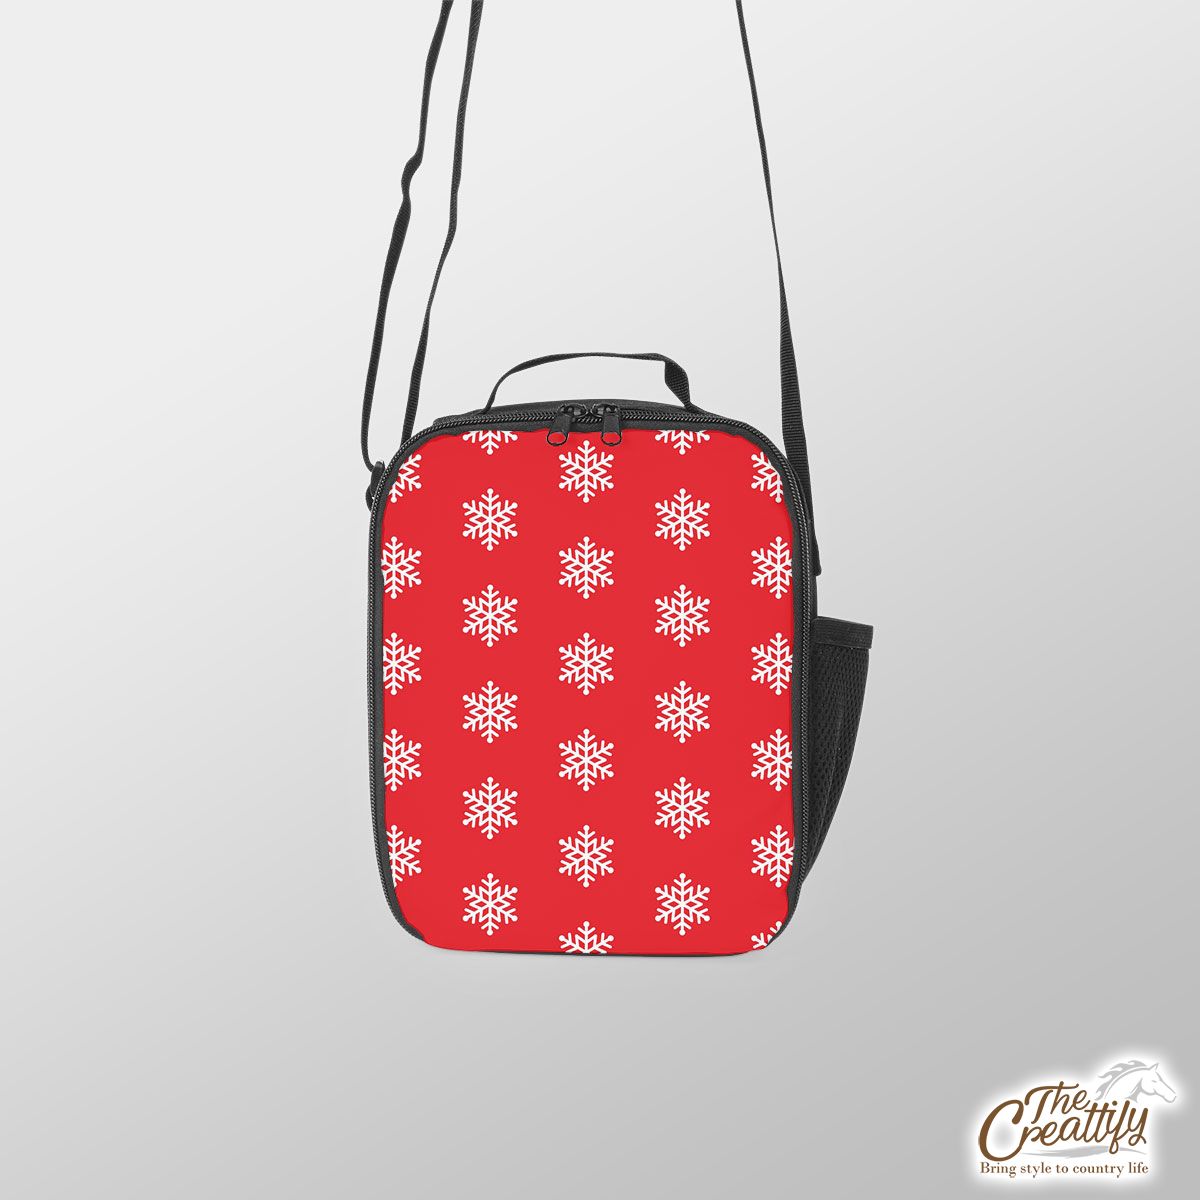 Snowflake Pattern, Christmas Snowflakes, Christmas Present Ideas With Red Lunch Box Bag